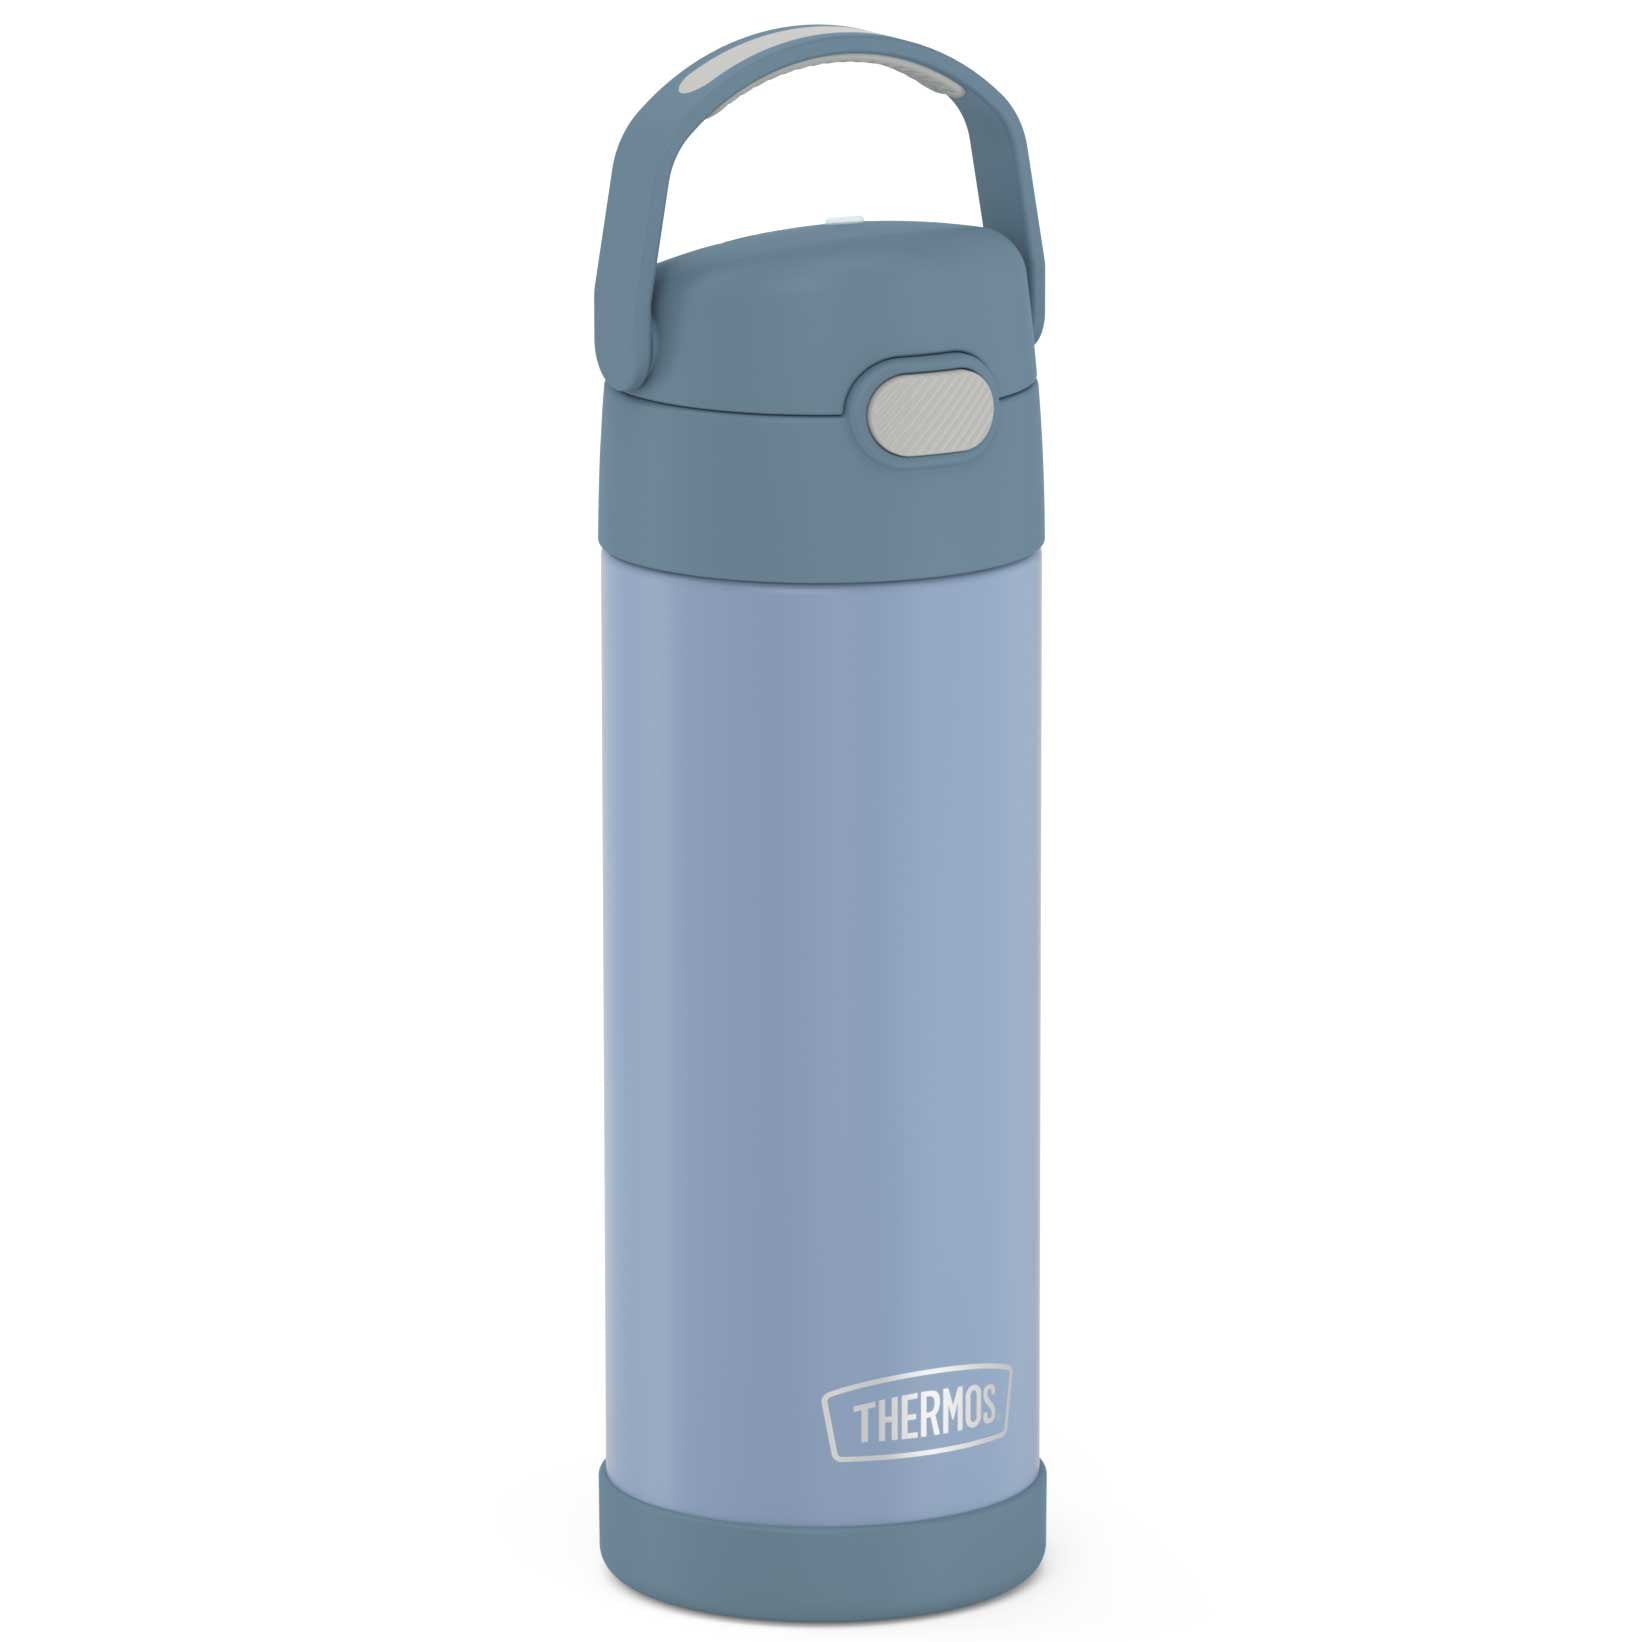 Thermoflask Kids 16 oz Stainless Steel Insulated Water Bottles, 2 Pack  (Blue)